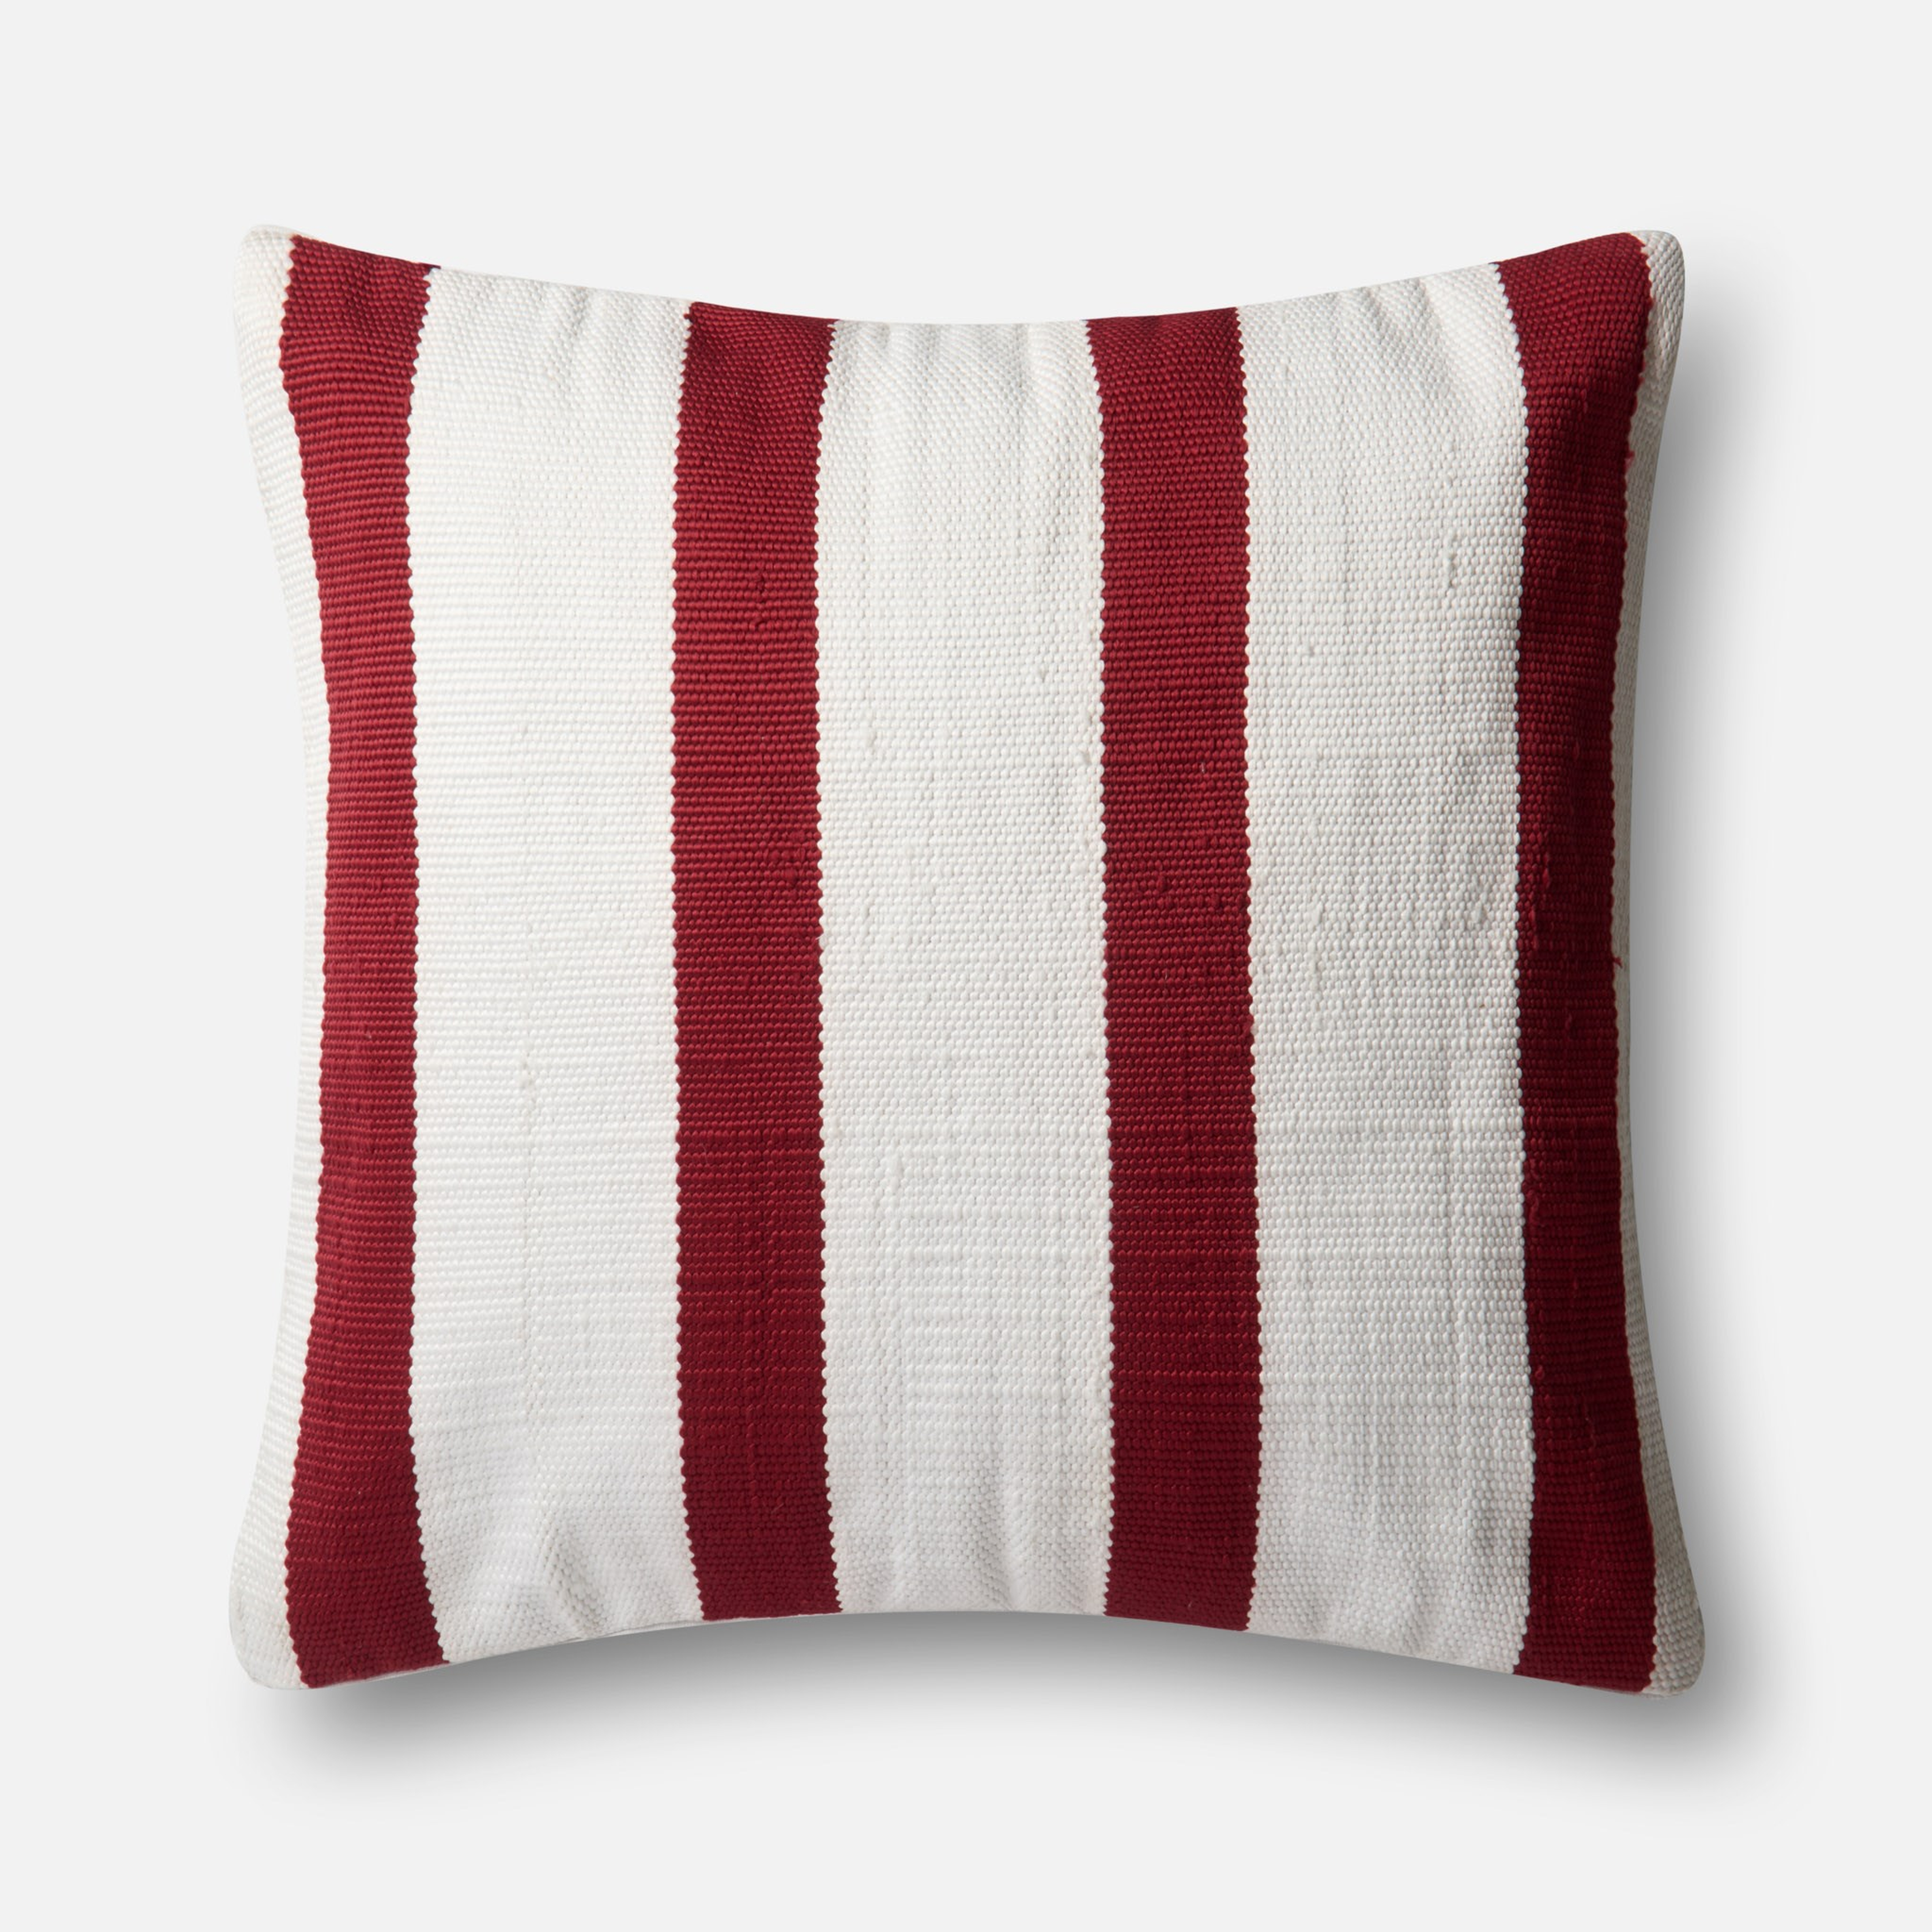 PILLOWS - RED / IVORY - 22" X 22" Cover w/Down - Loloi Rugs